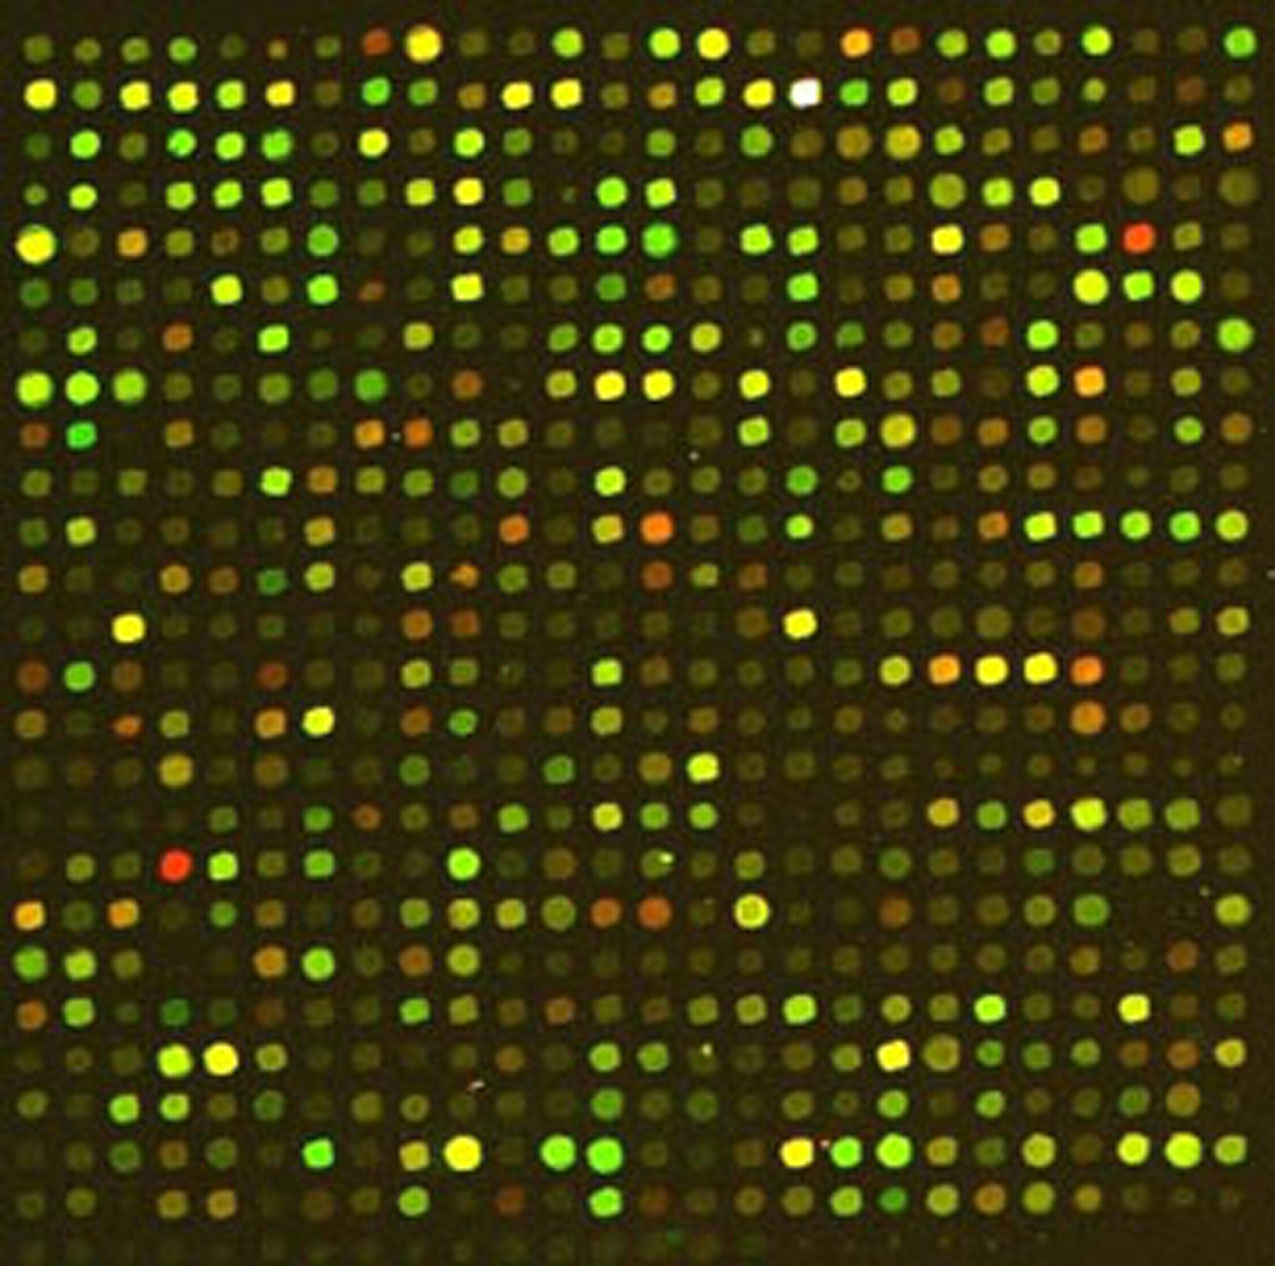 this is the microarray picture